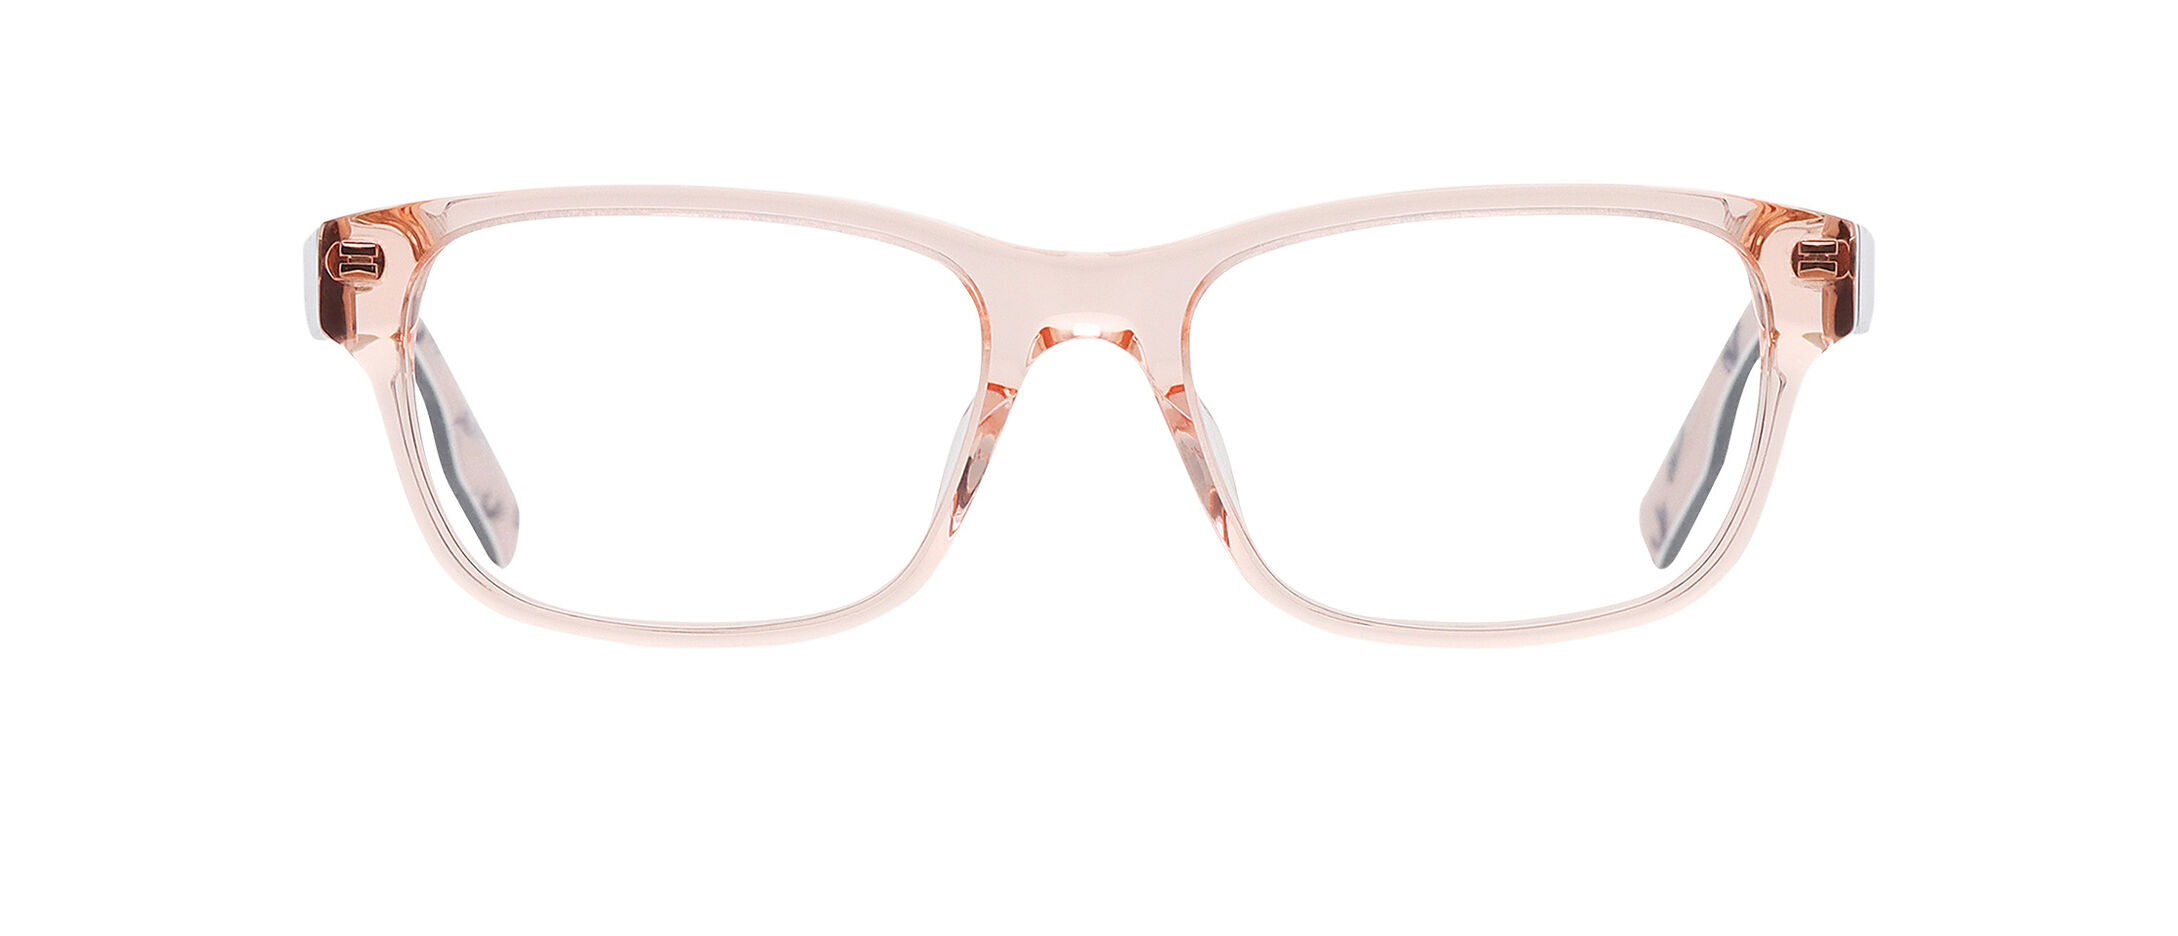 Converse CV5020Y Kids Glasses | Free Shipping and Returns | Eyeconic